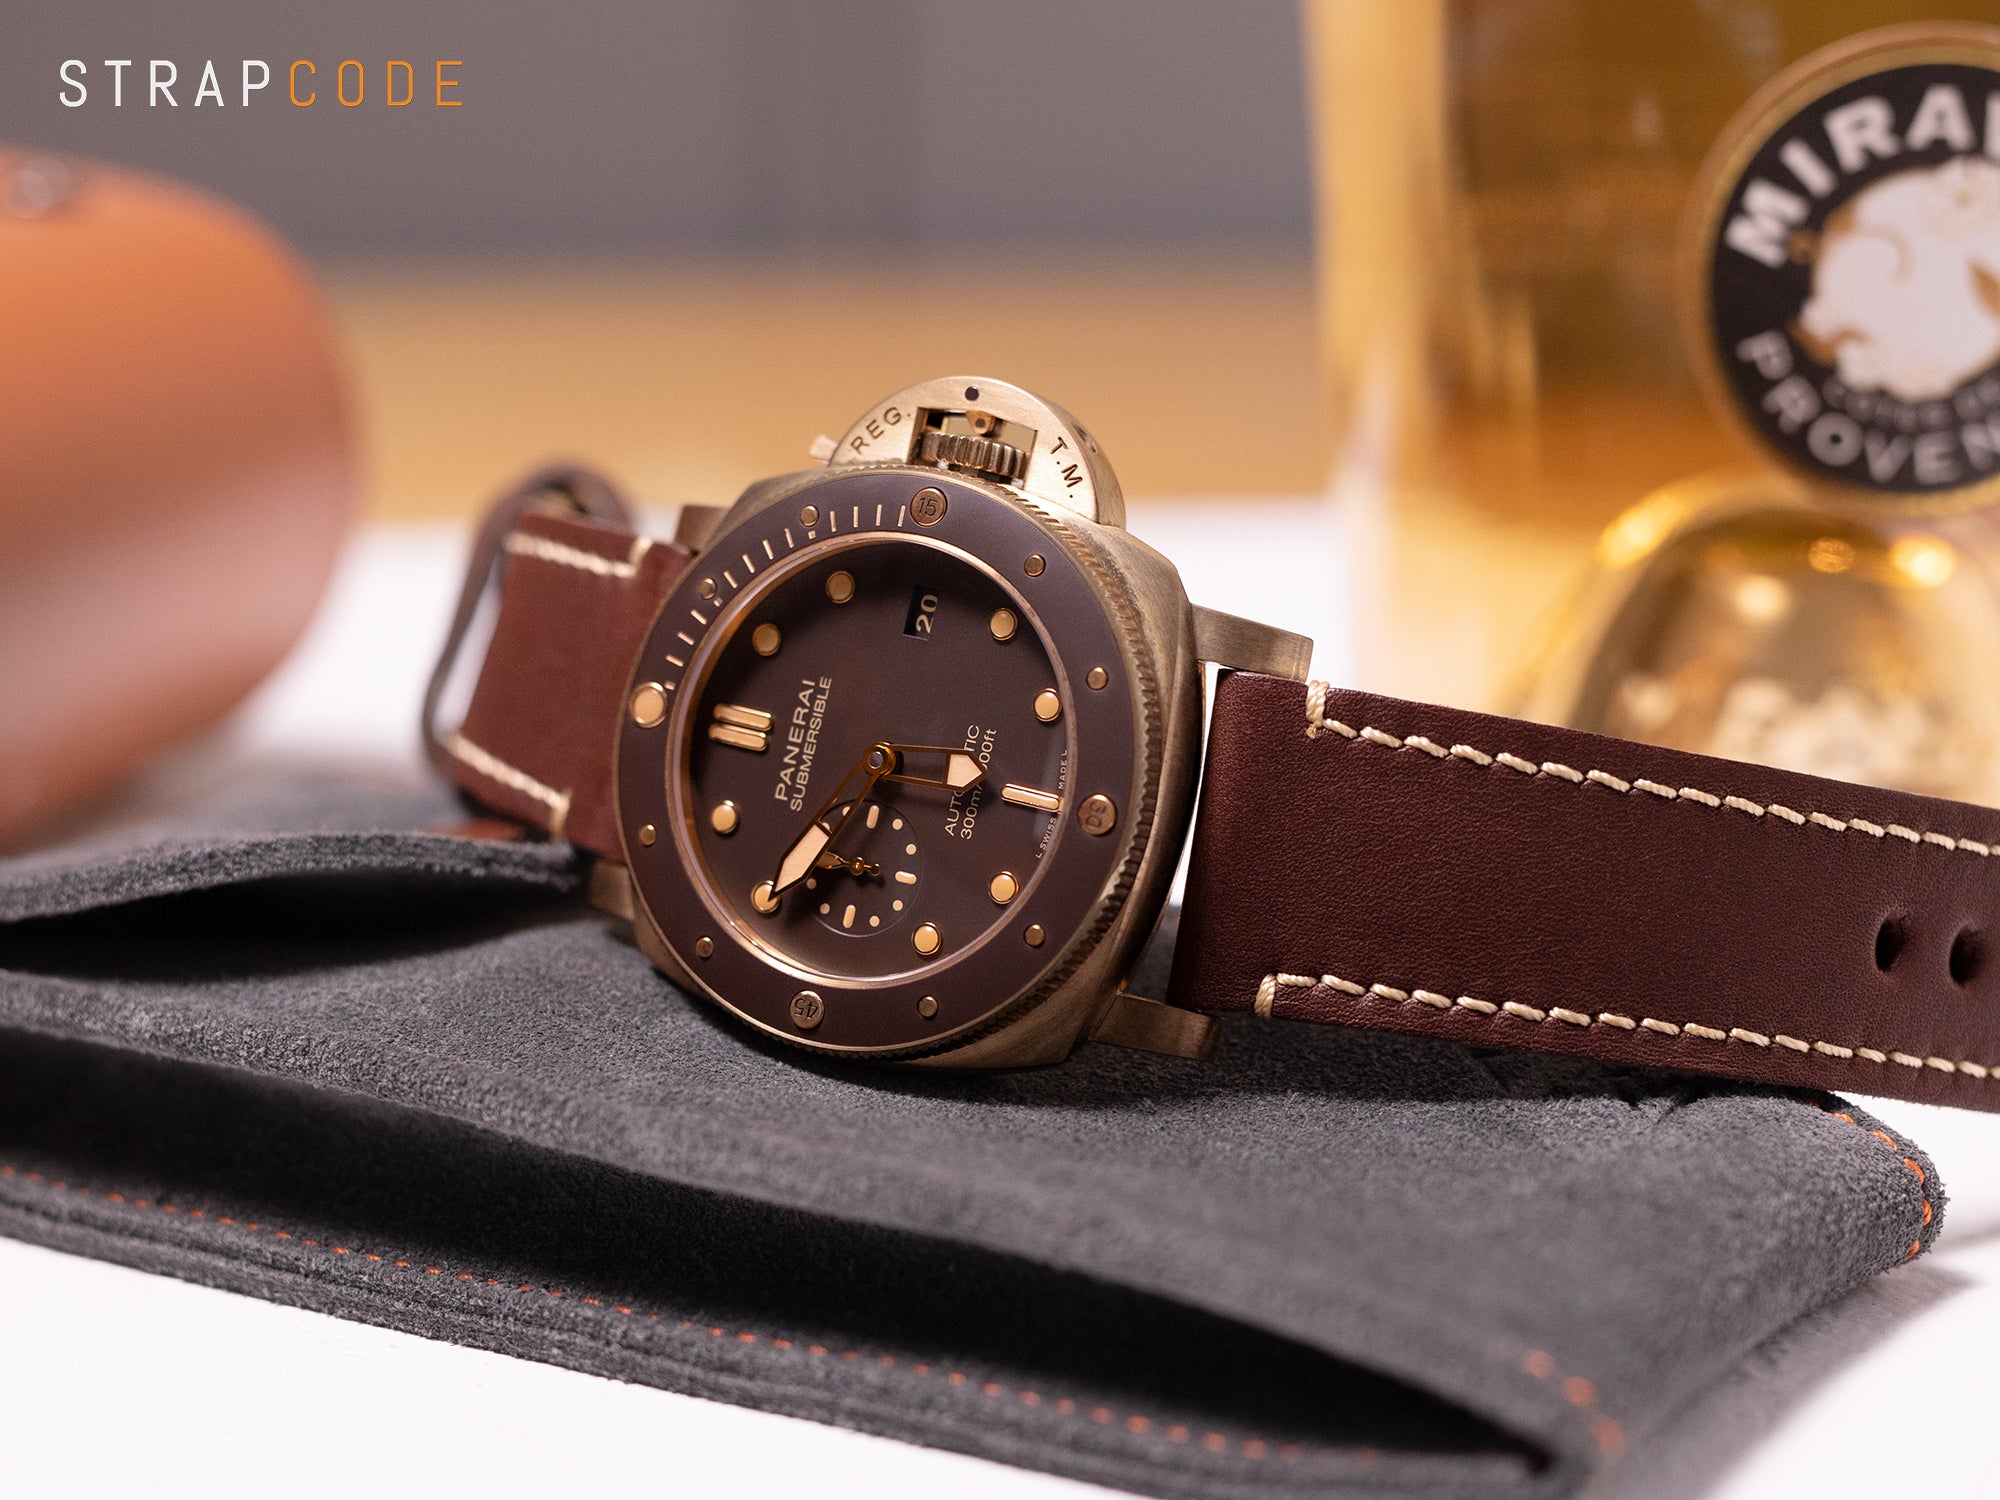 Panerai Submersible Bronzo PAM 968 and 26mm MiLTAT Cashmere Calf Dark Brown watch strap from Strapcode